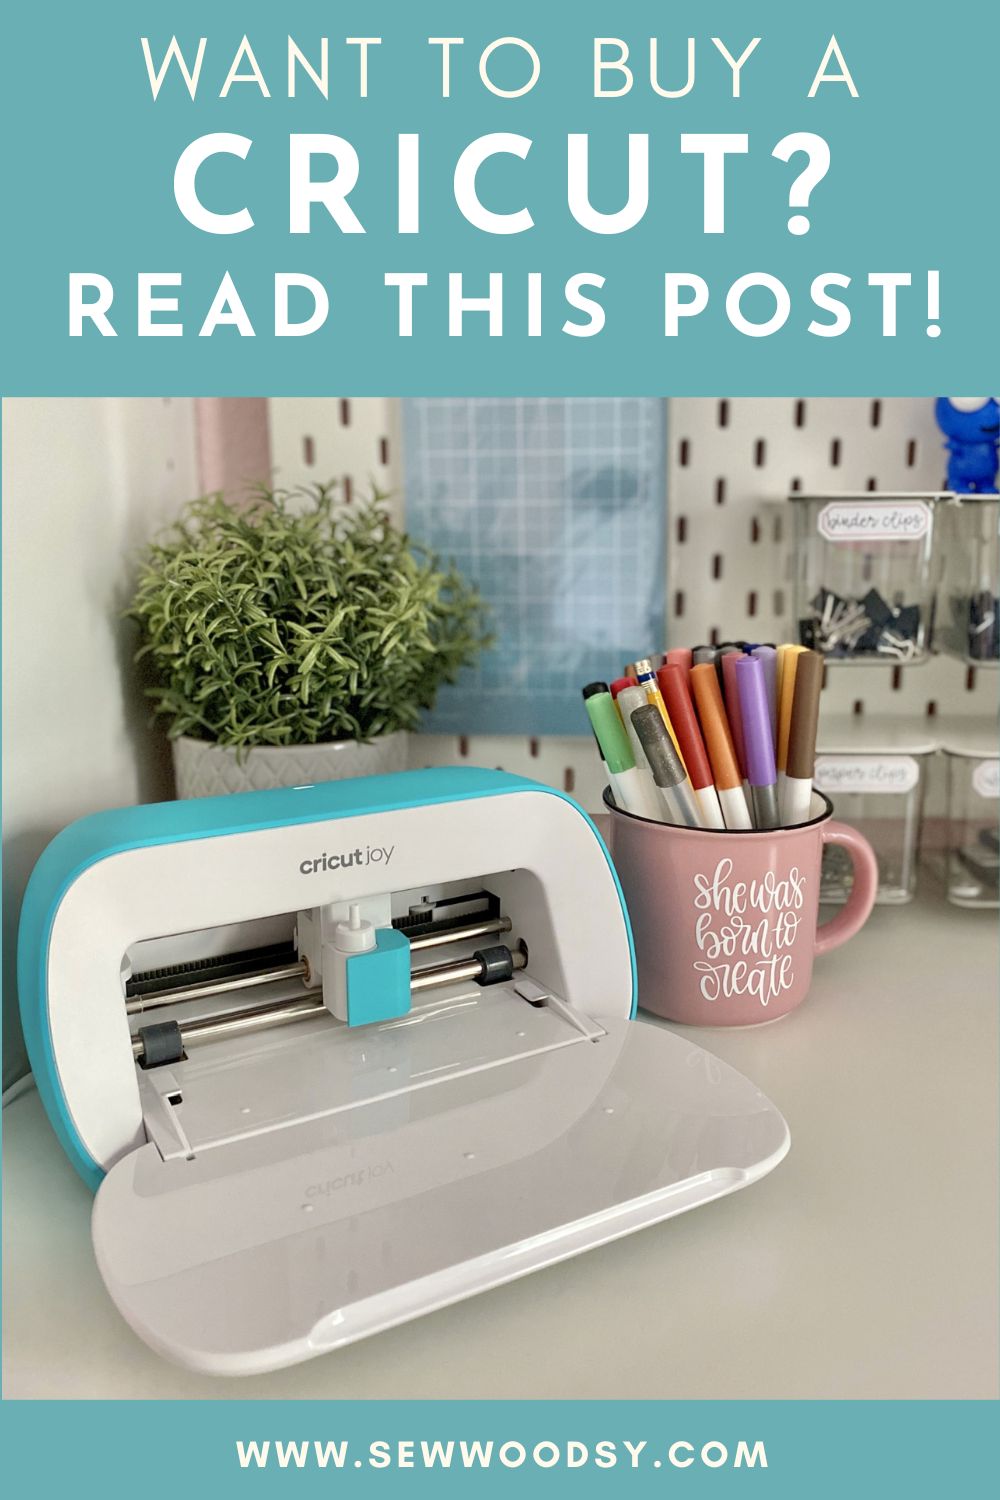 White and blue Cricut Joy with text on image for Pinterest.